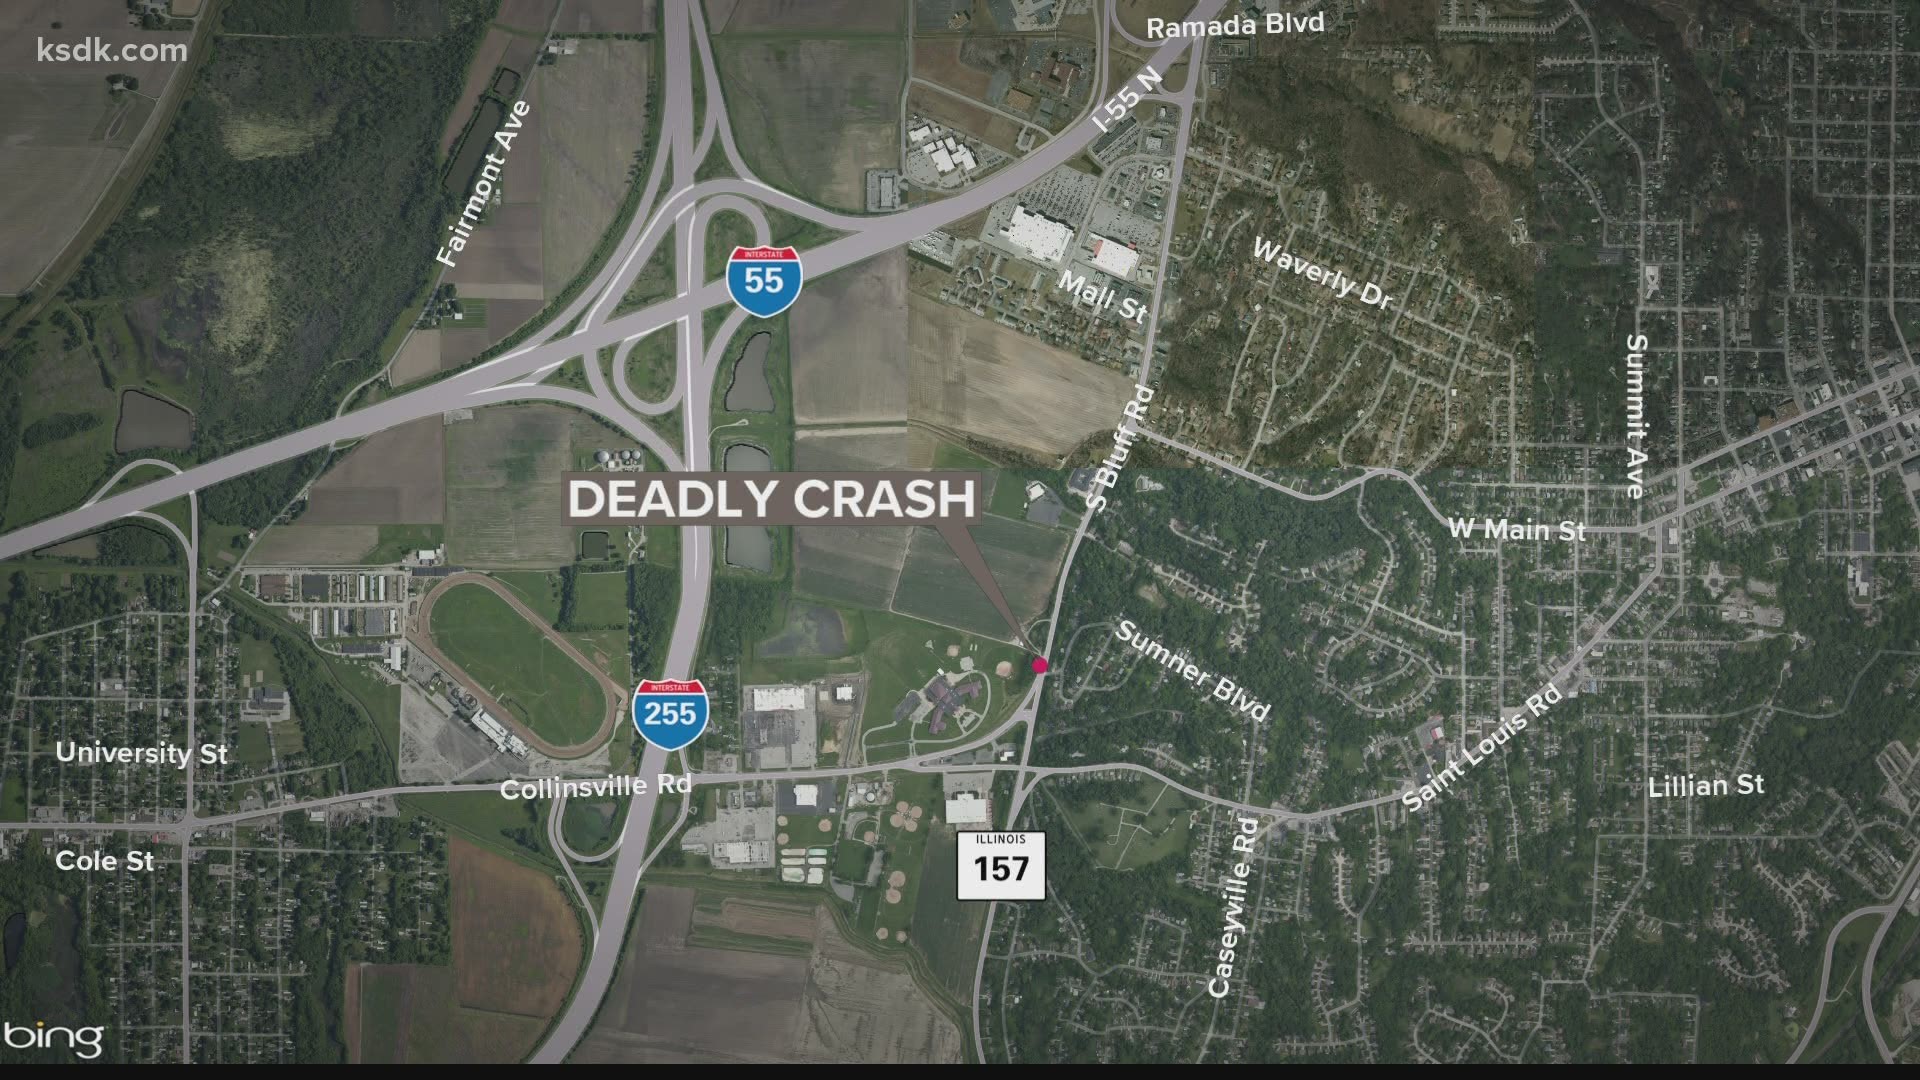 The cause of the crash remains under investigation